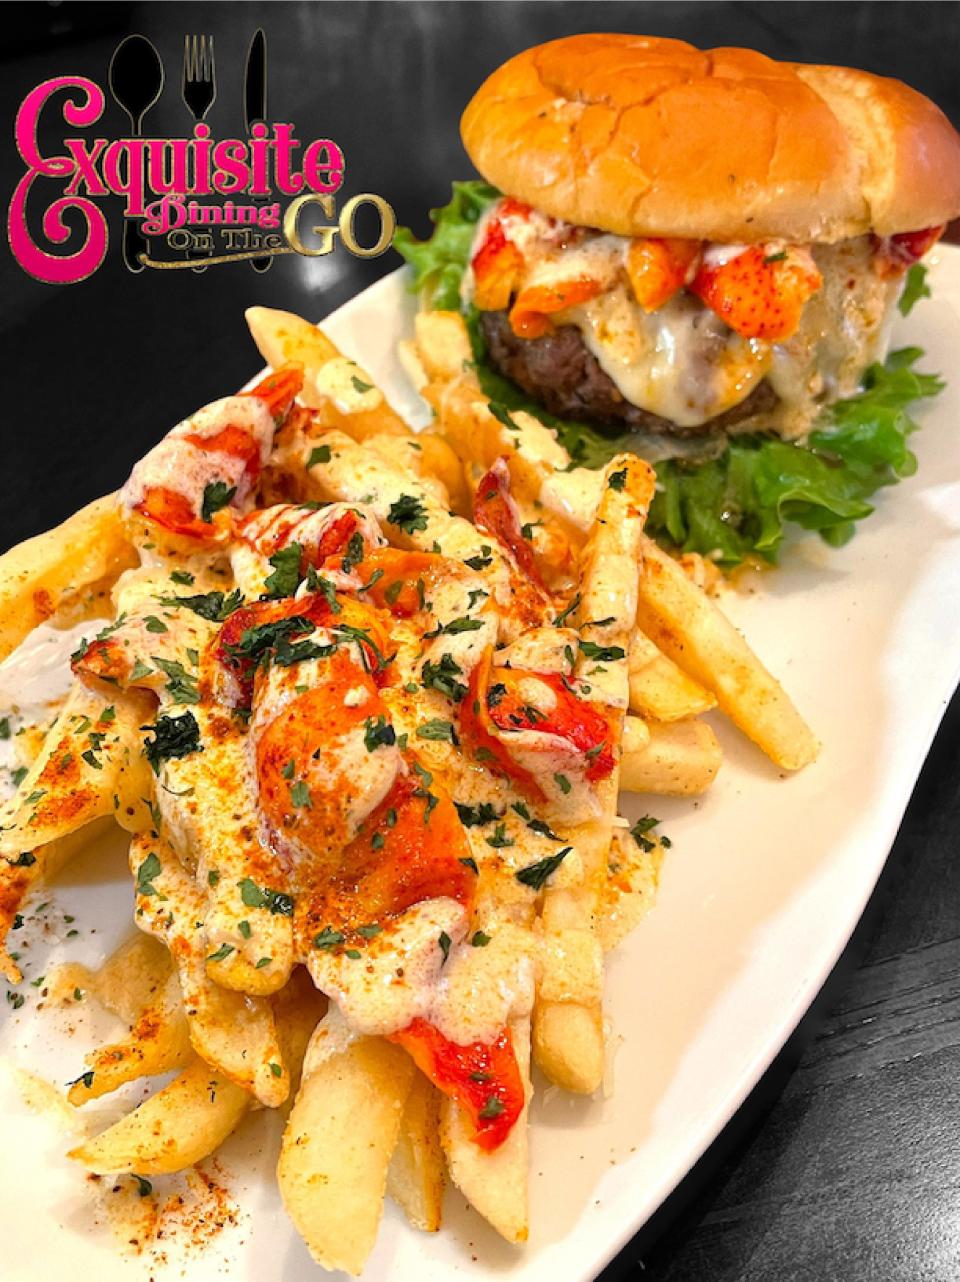 One of the specialties from Exquisite Dining on the Go is the lobster burger with loaded lobster fries.